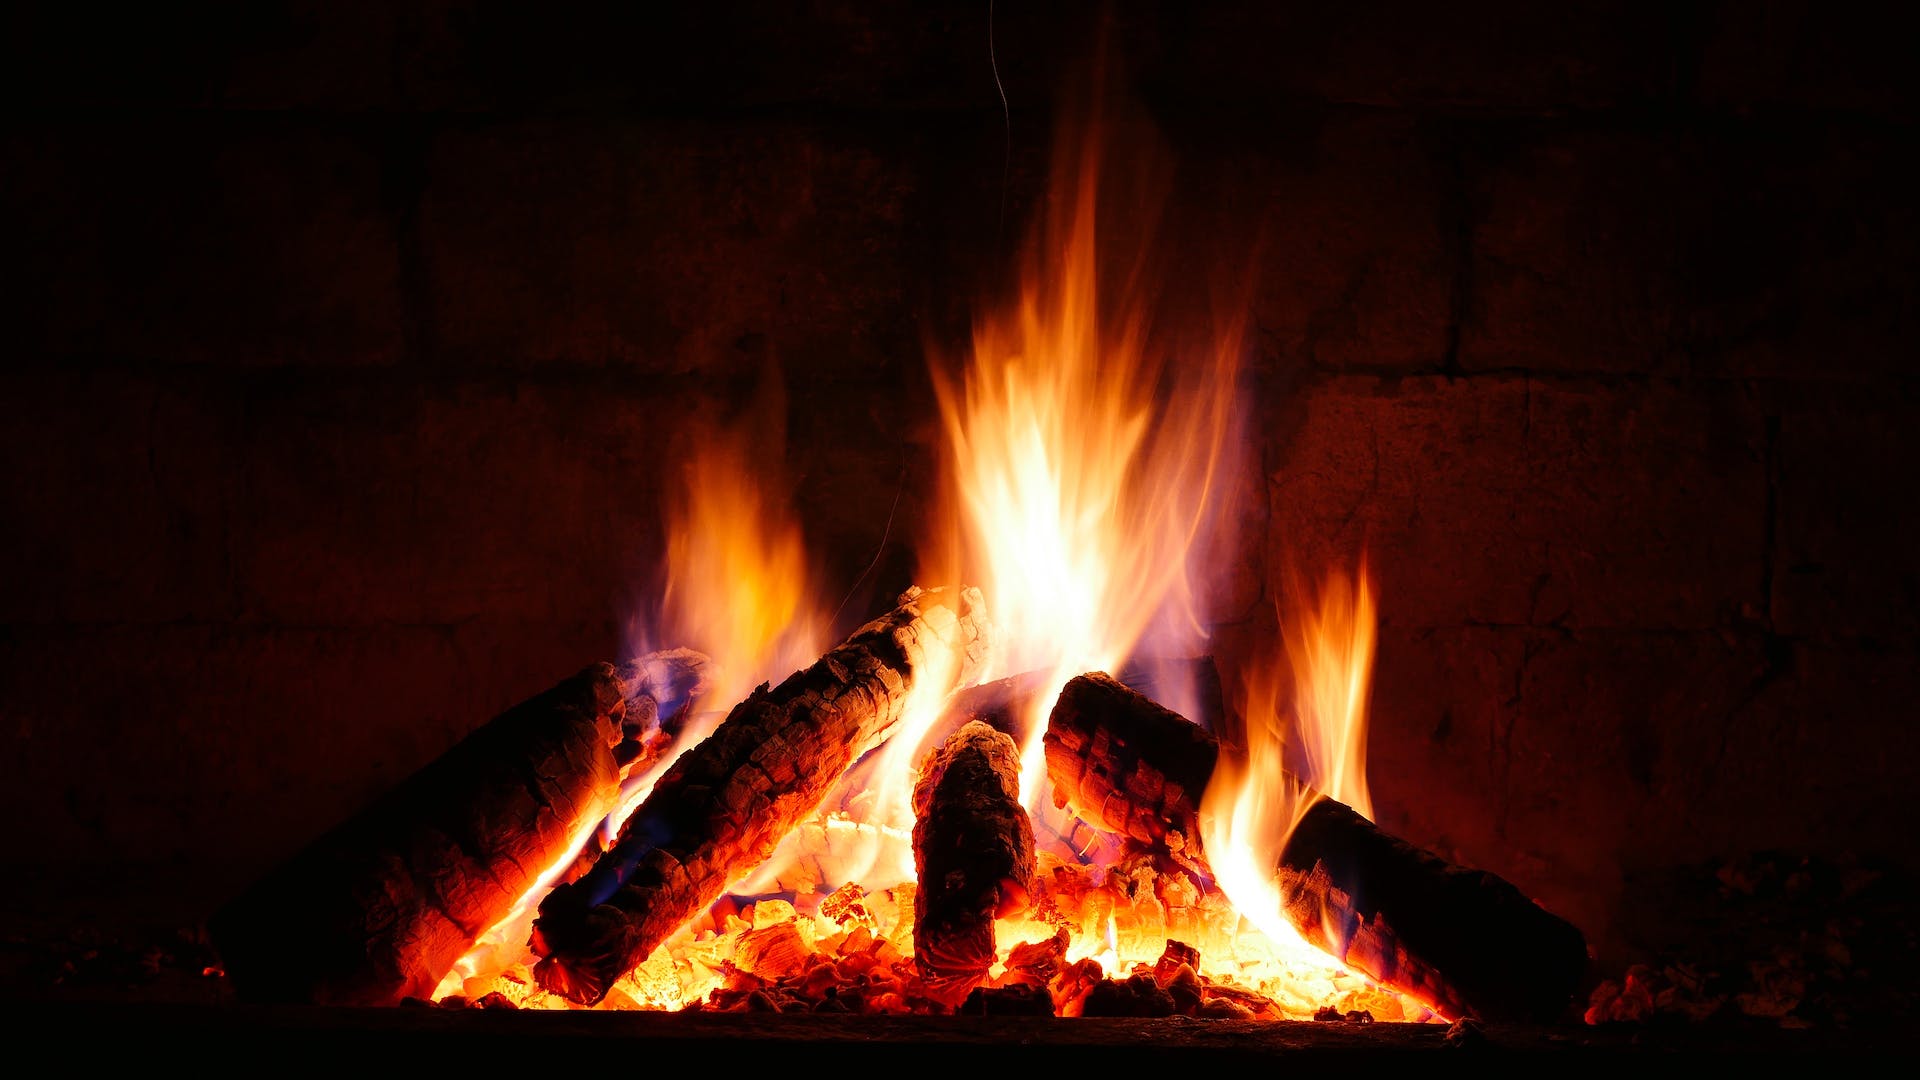 Fireplace | Source: Pexels